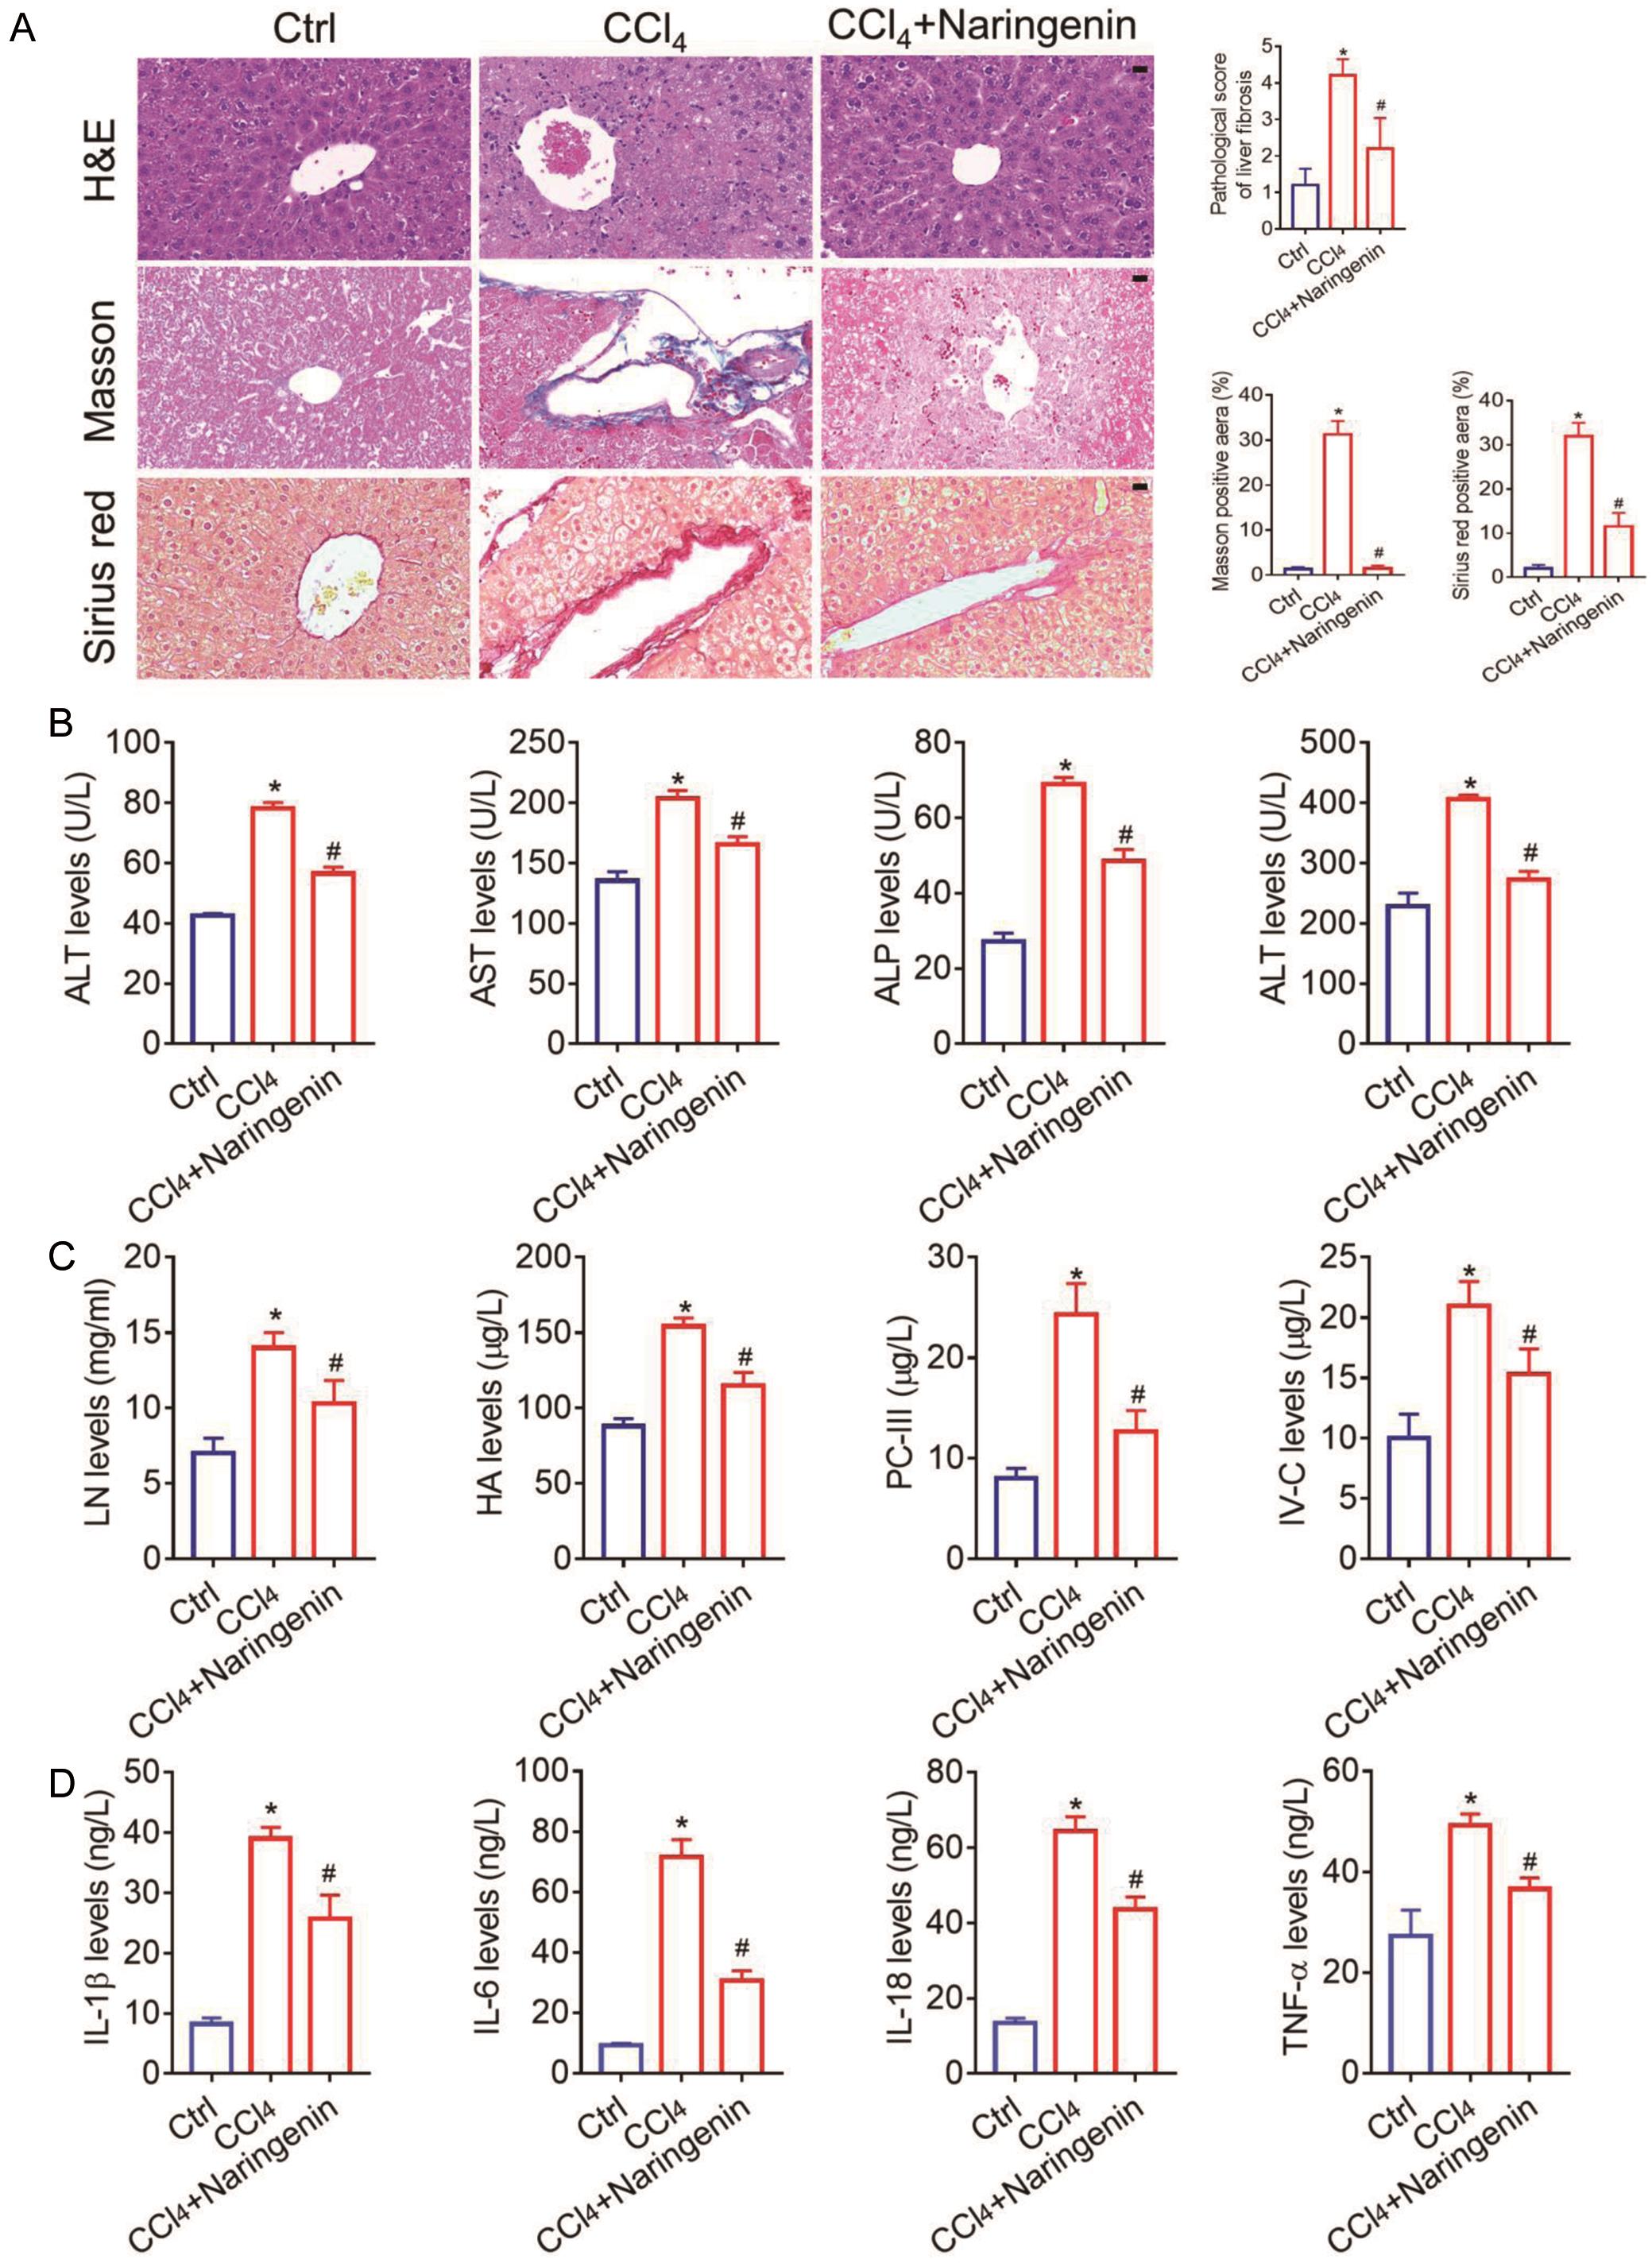 Naringenin reduces liver fibrosis in mice.